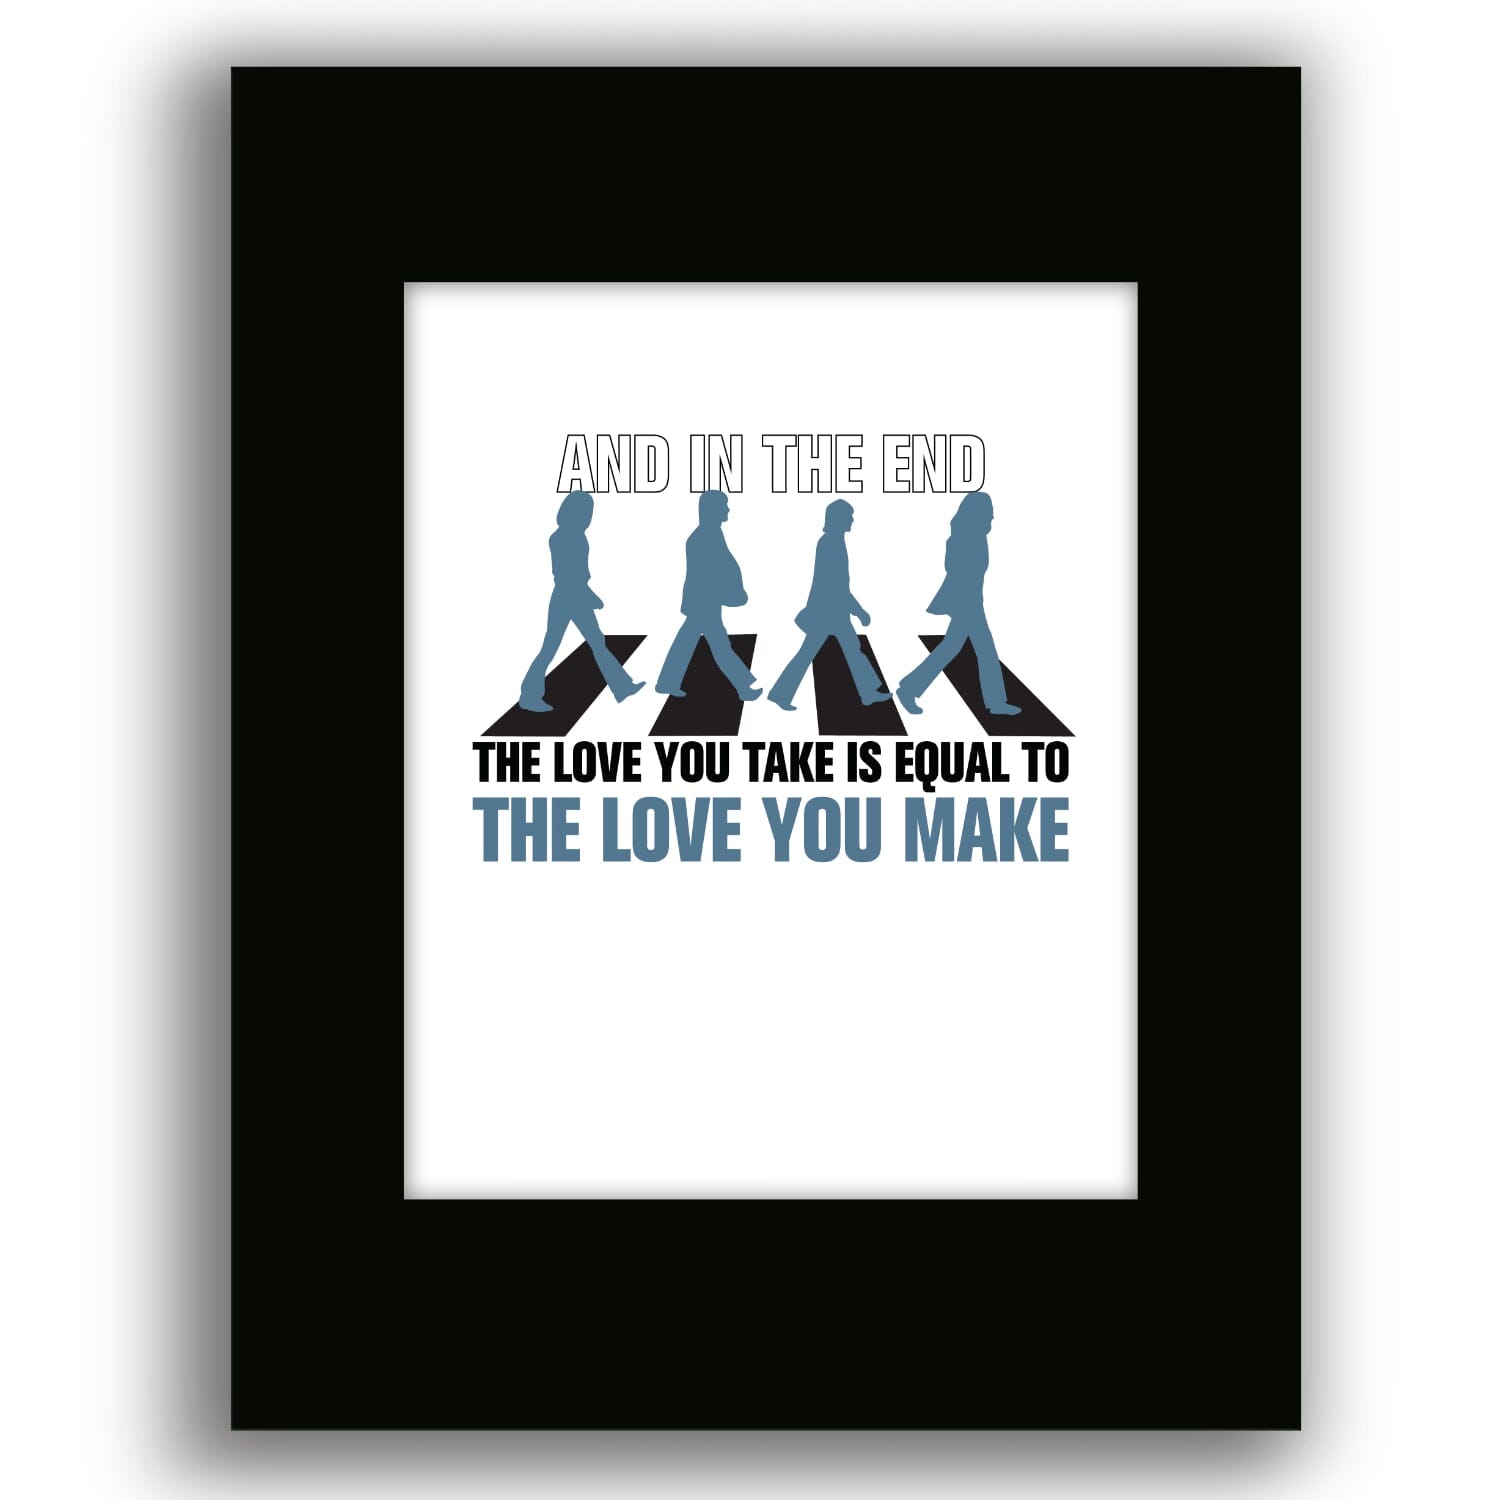 The End by the Beatles - Song Lyric Music Poster Art Print Song Lyrics Art Song Lyrics Art 8x10 Black Matted Print 